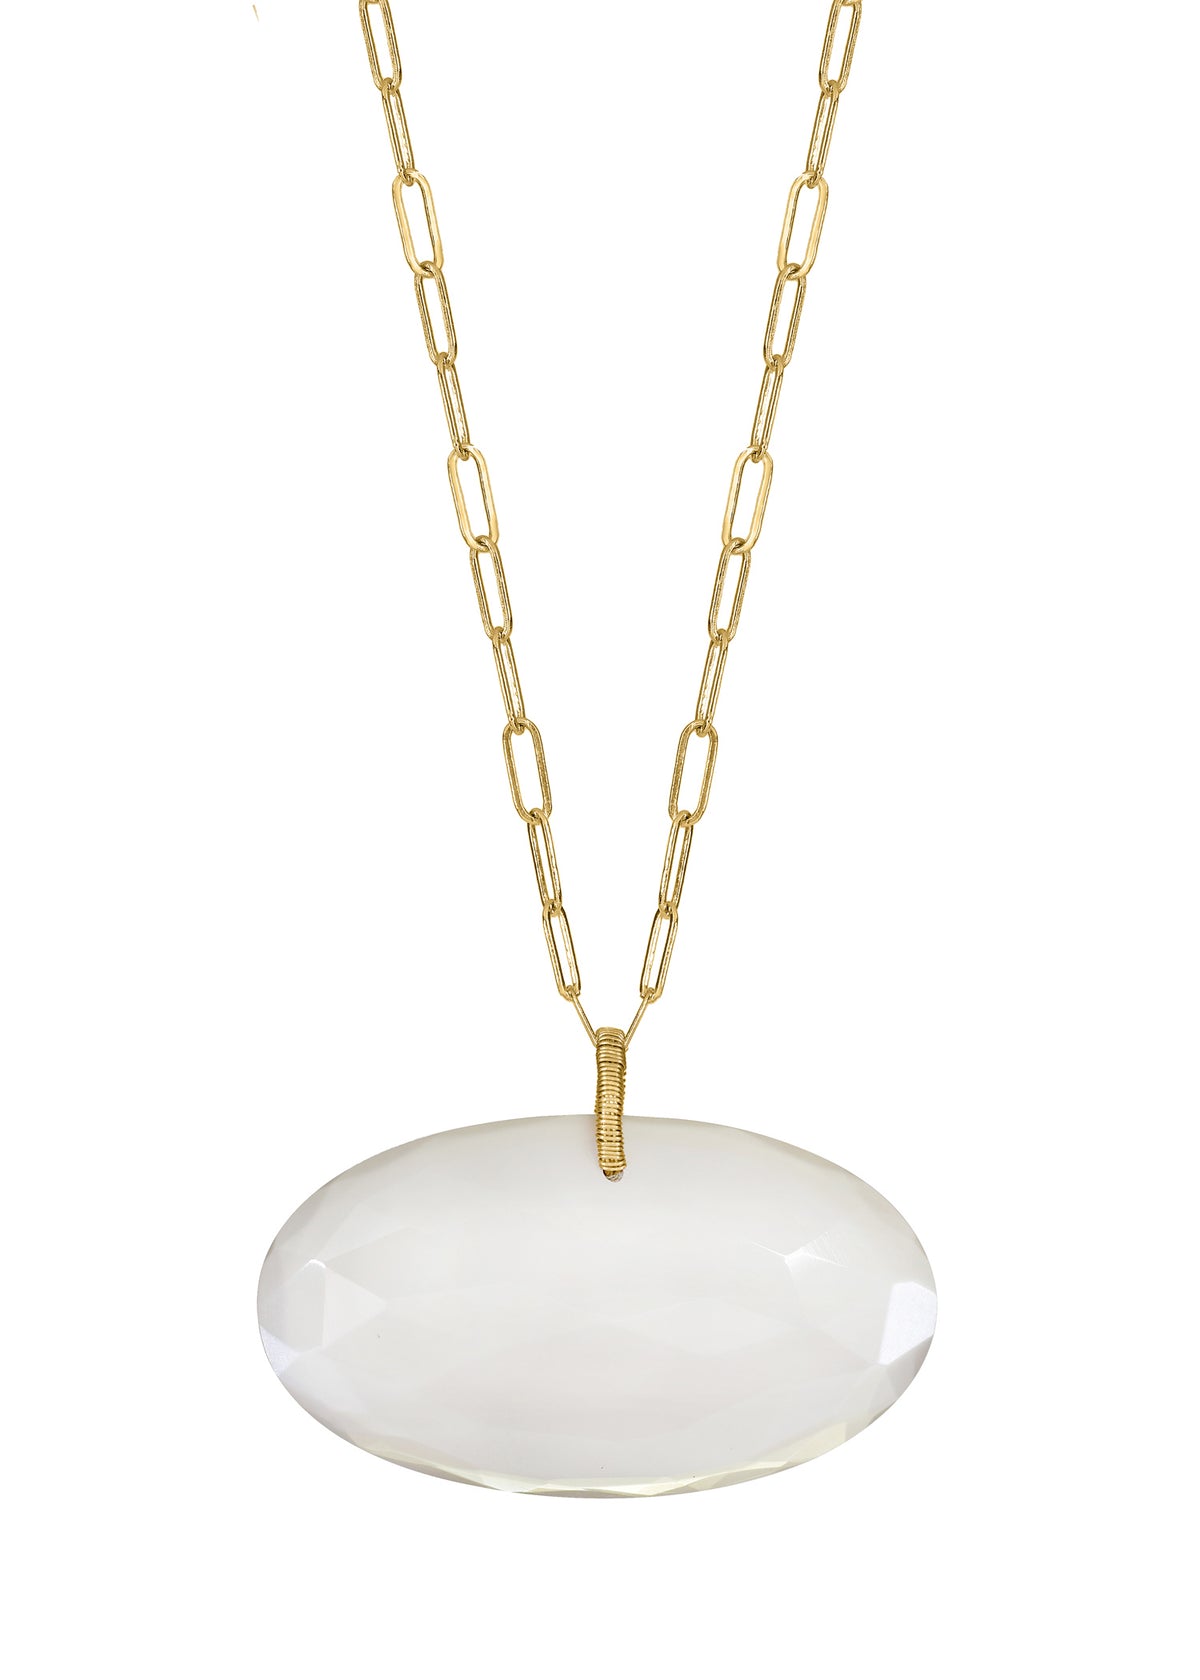 Gray moonstone 14k gold Necklace measures 17&quot; in length Pendant measures 7/8&quot; in length and 1 1/2&quot; in width Handmade in our Los Angeles studio